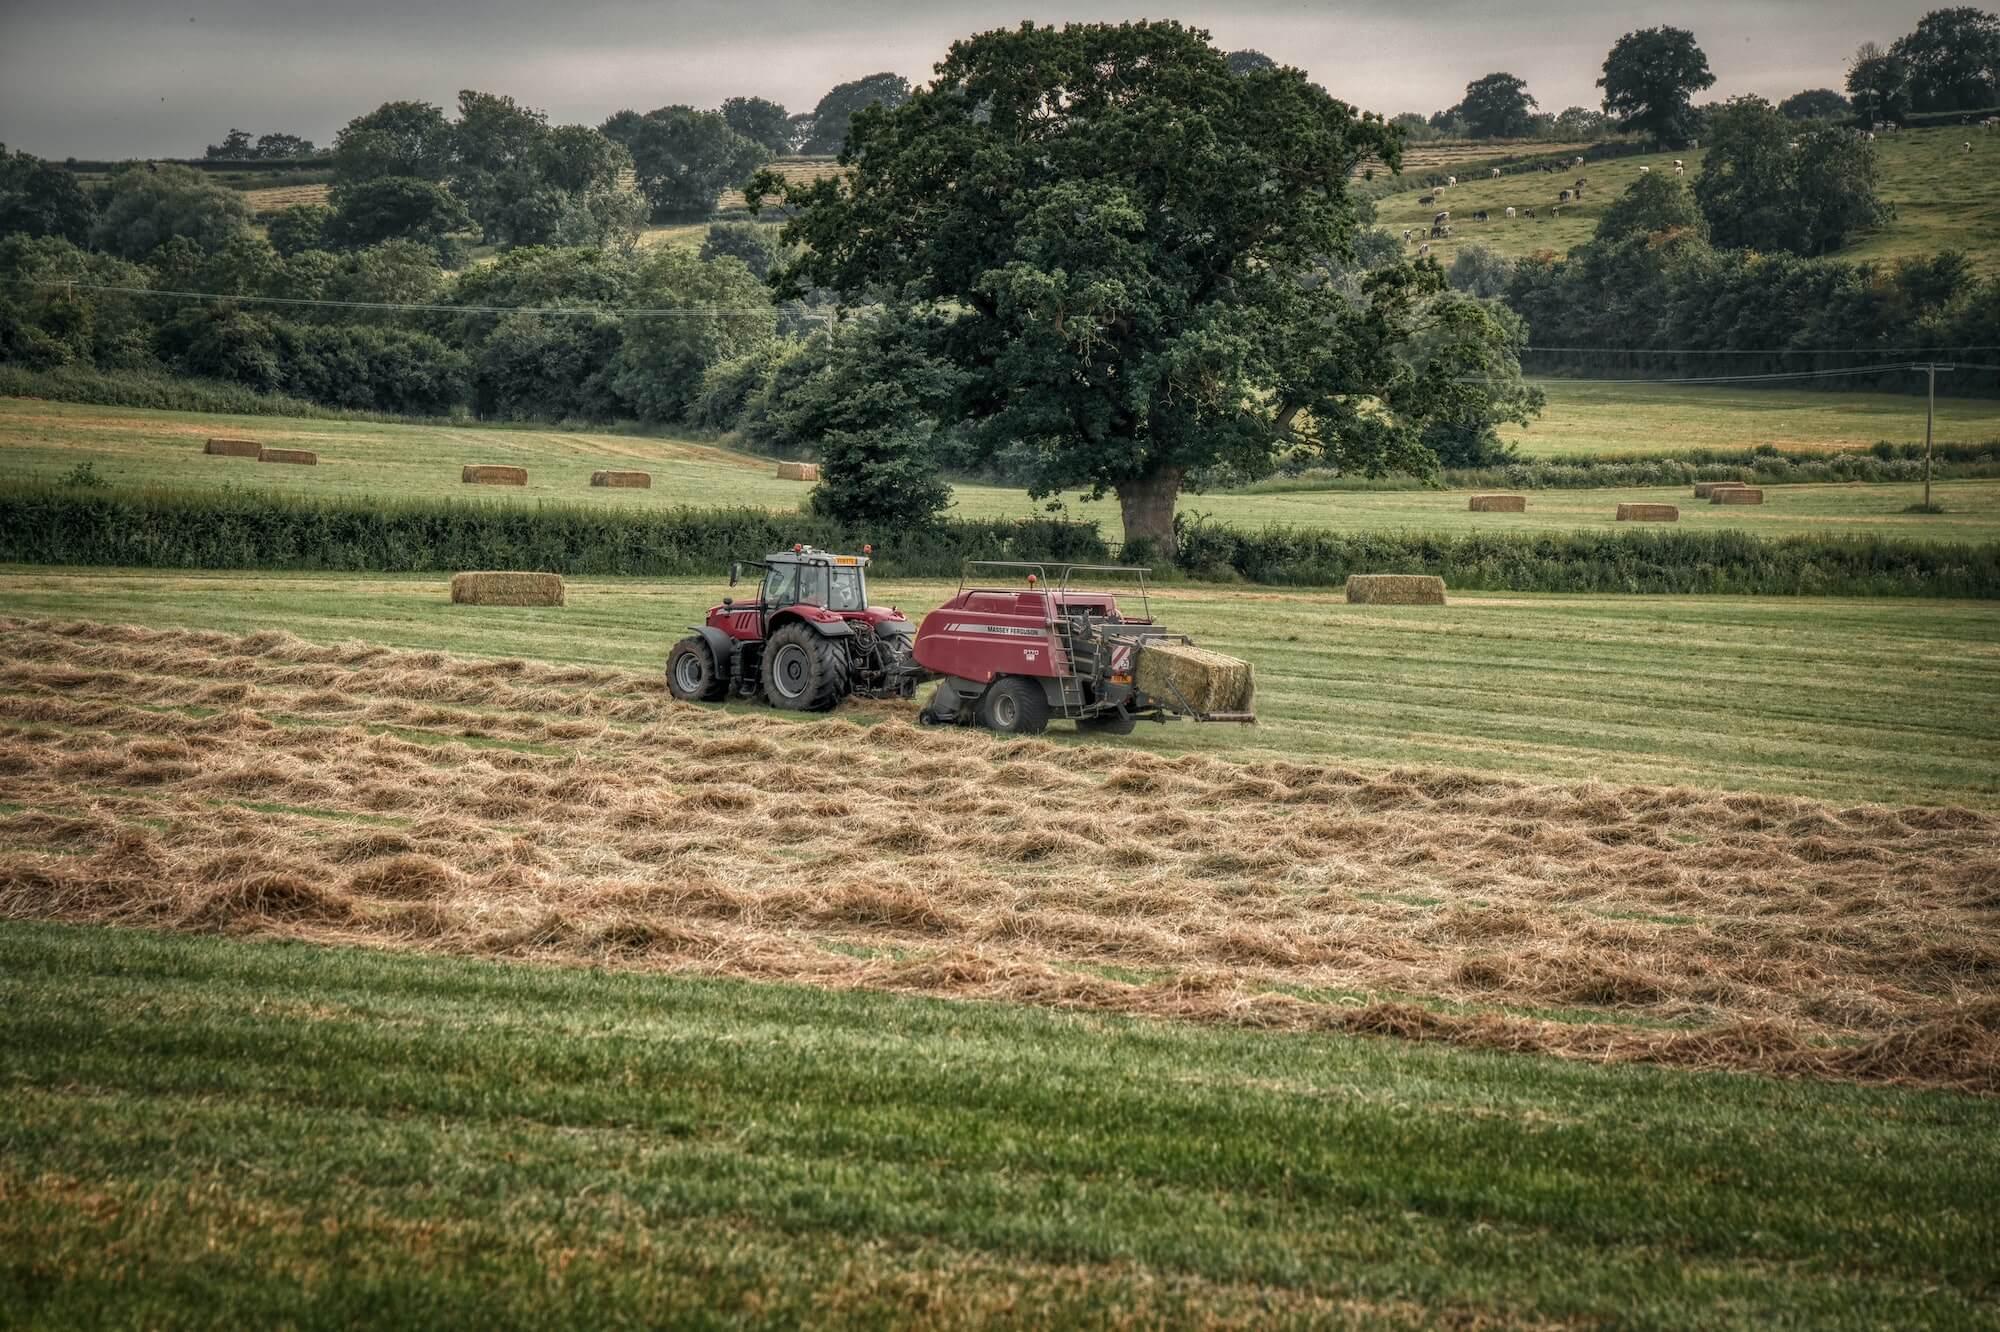 Tractor baling hay in a field.